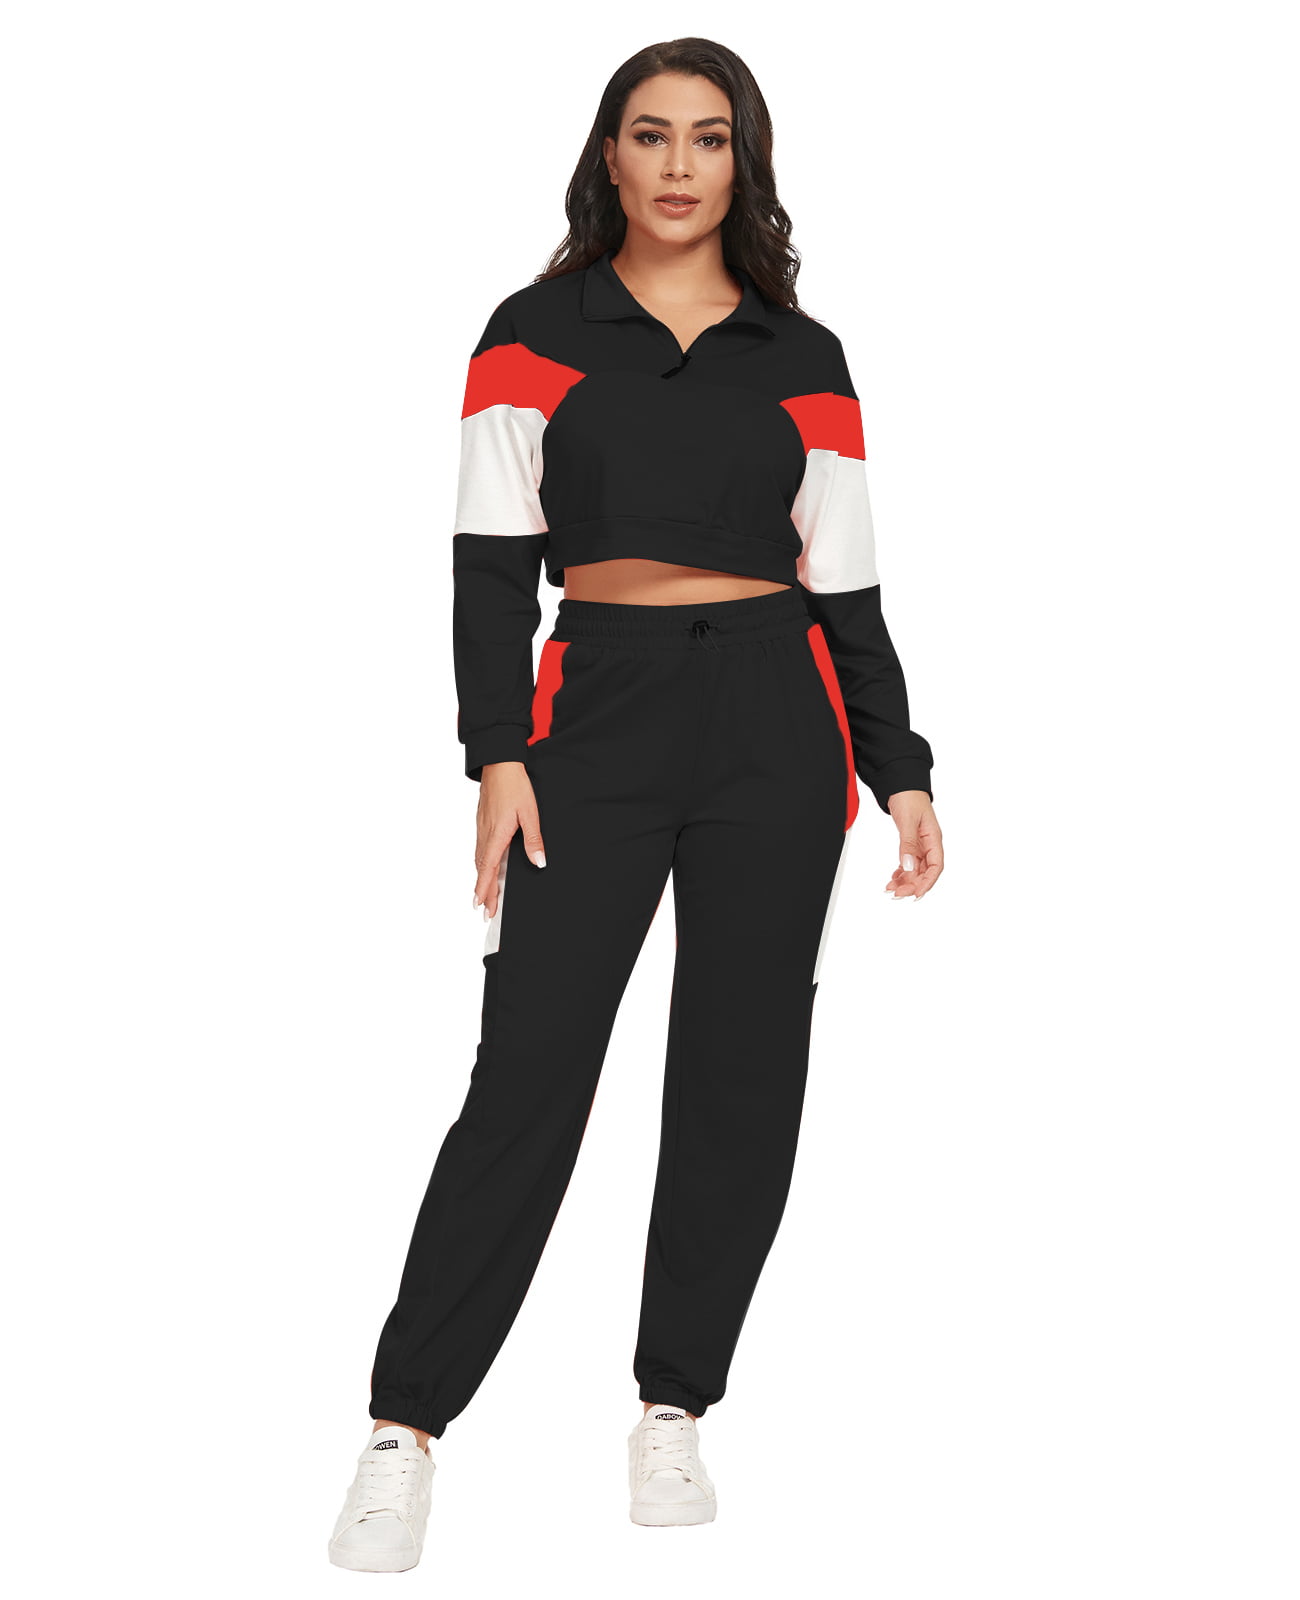 MintLimit Women Sweatsuits Sets 2 Piece Tracksuit Stripe Patchwork Long  Sleeve Pullover and Skinny Long Pants - Walmart.com